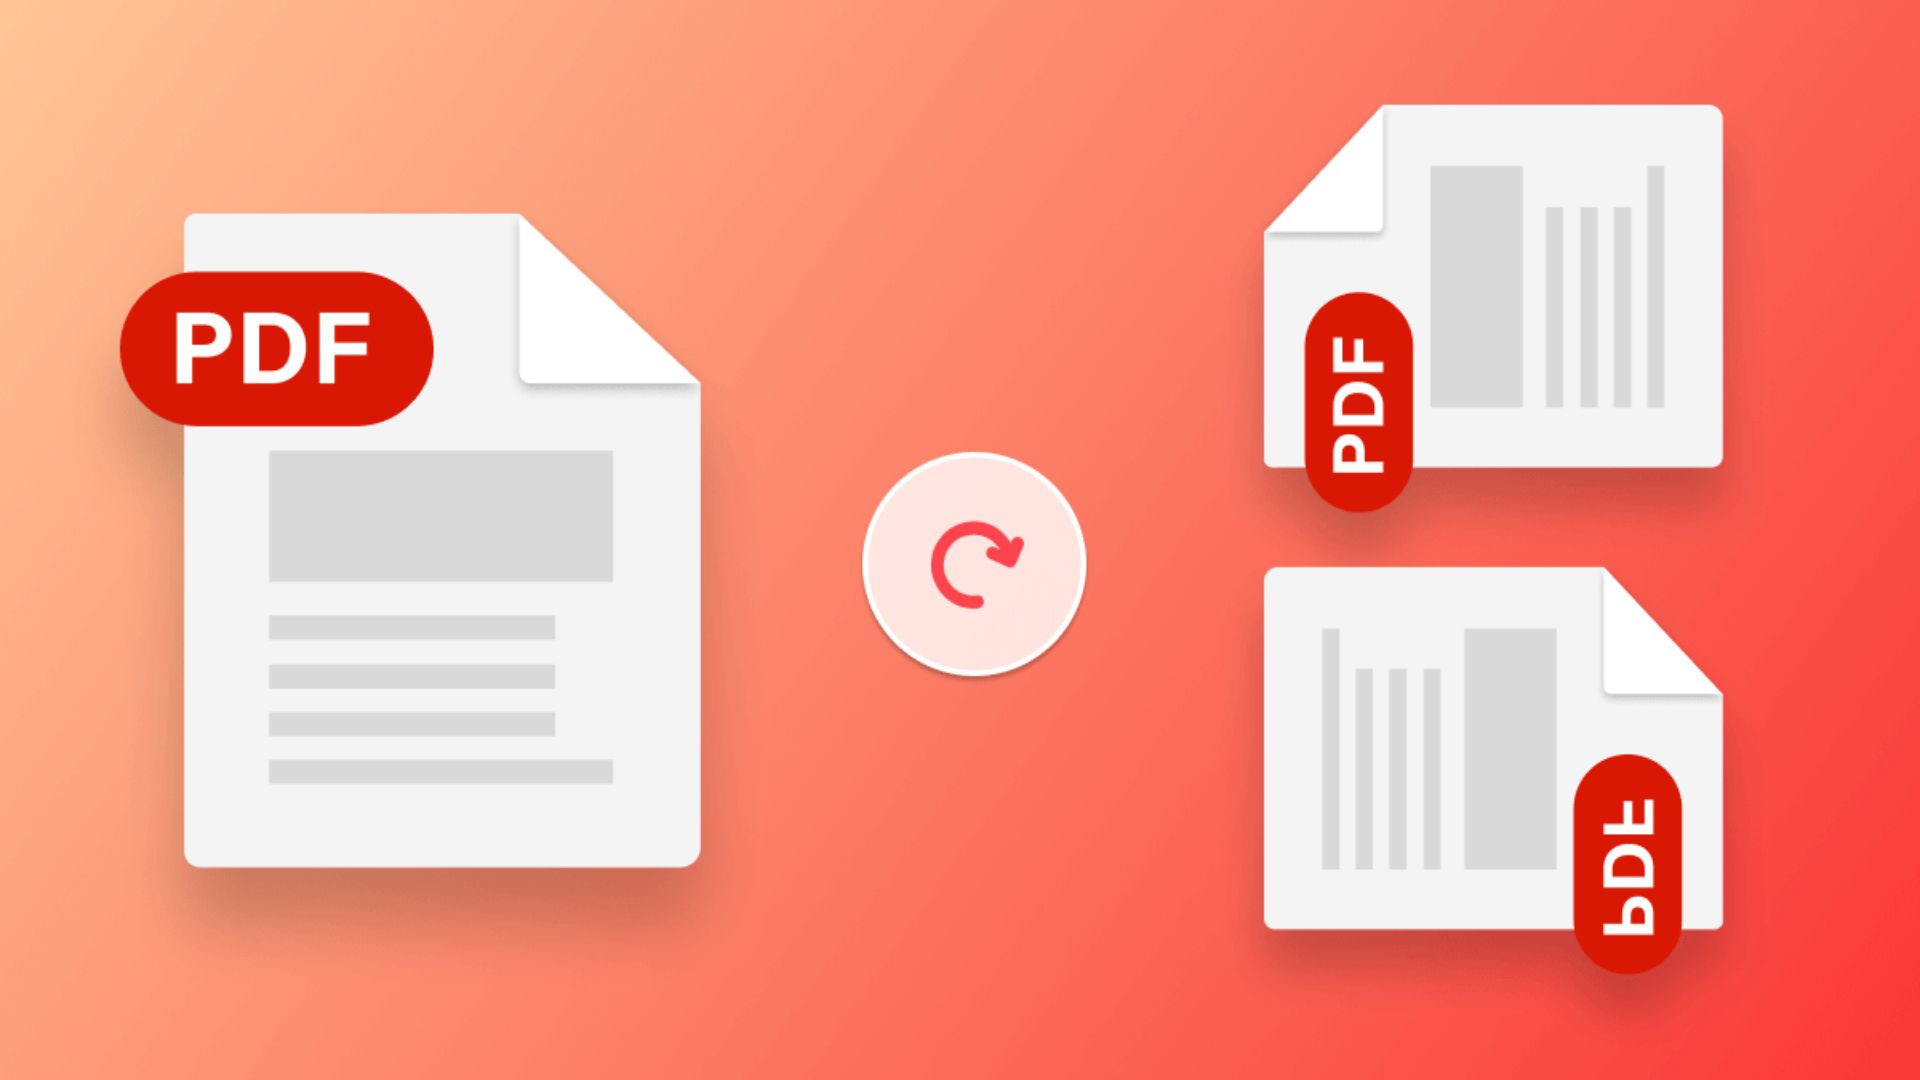 this image shows How to Rotate Pages in a PDF File